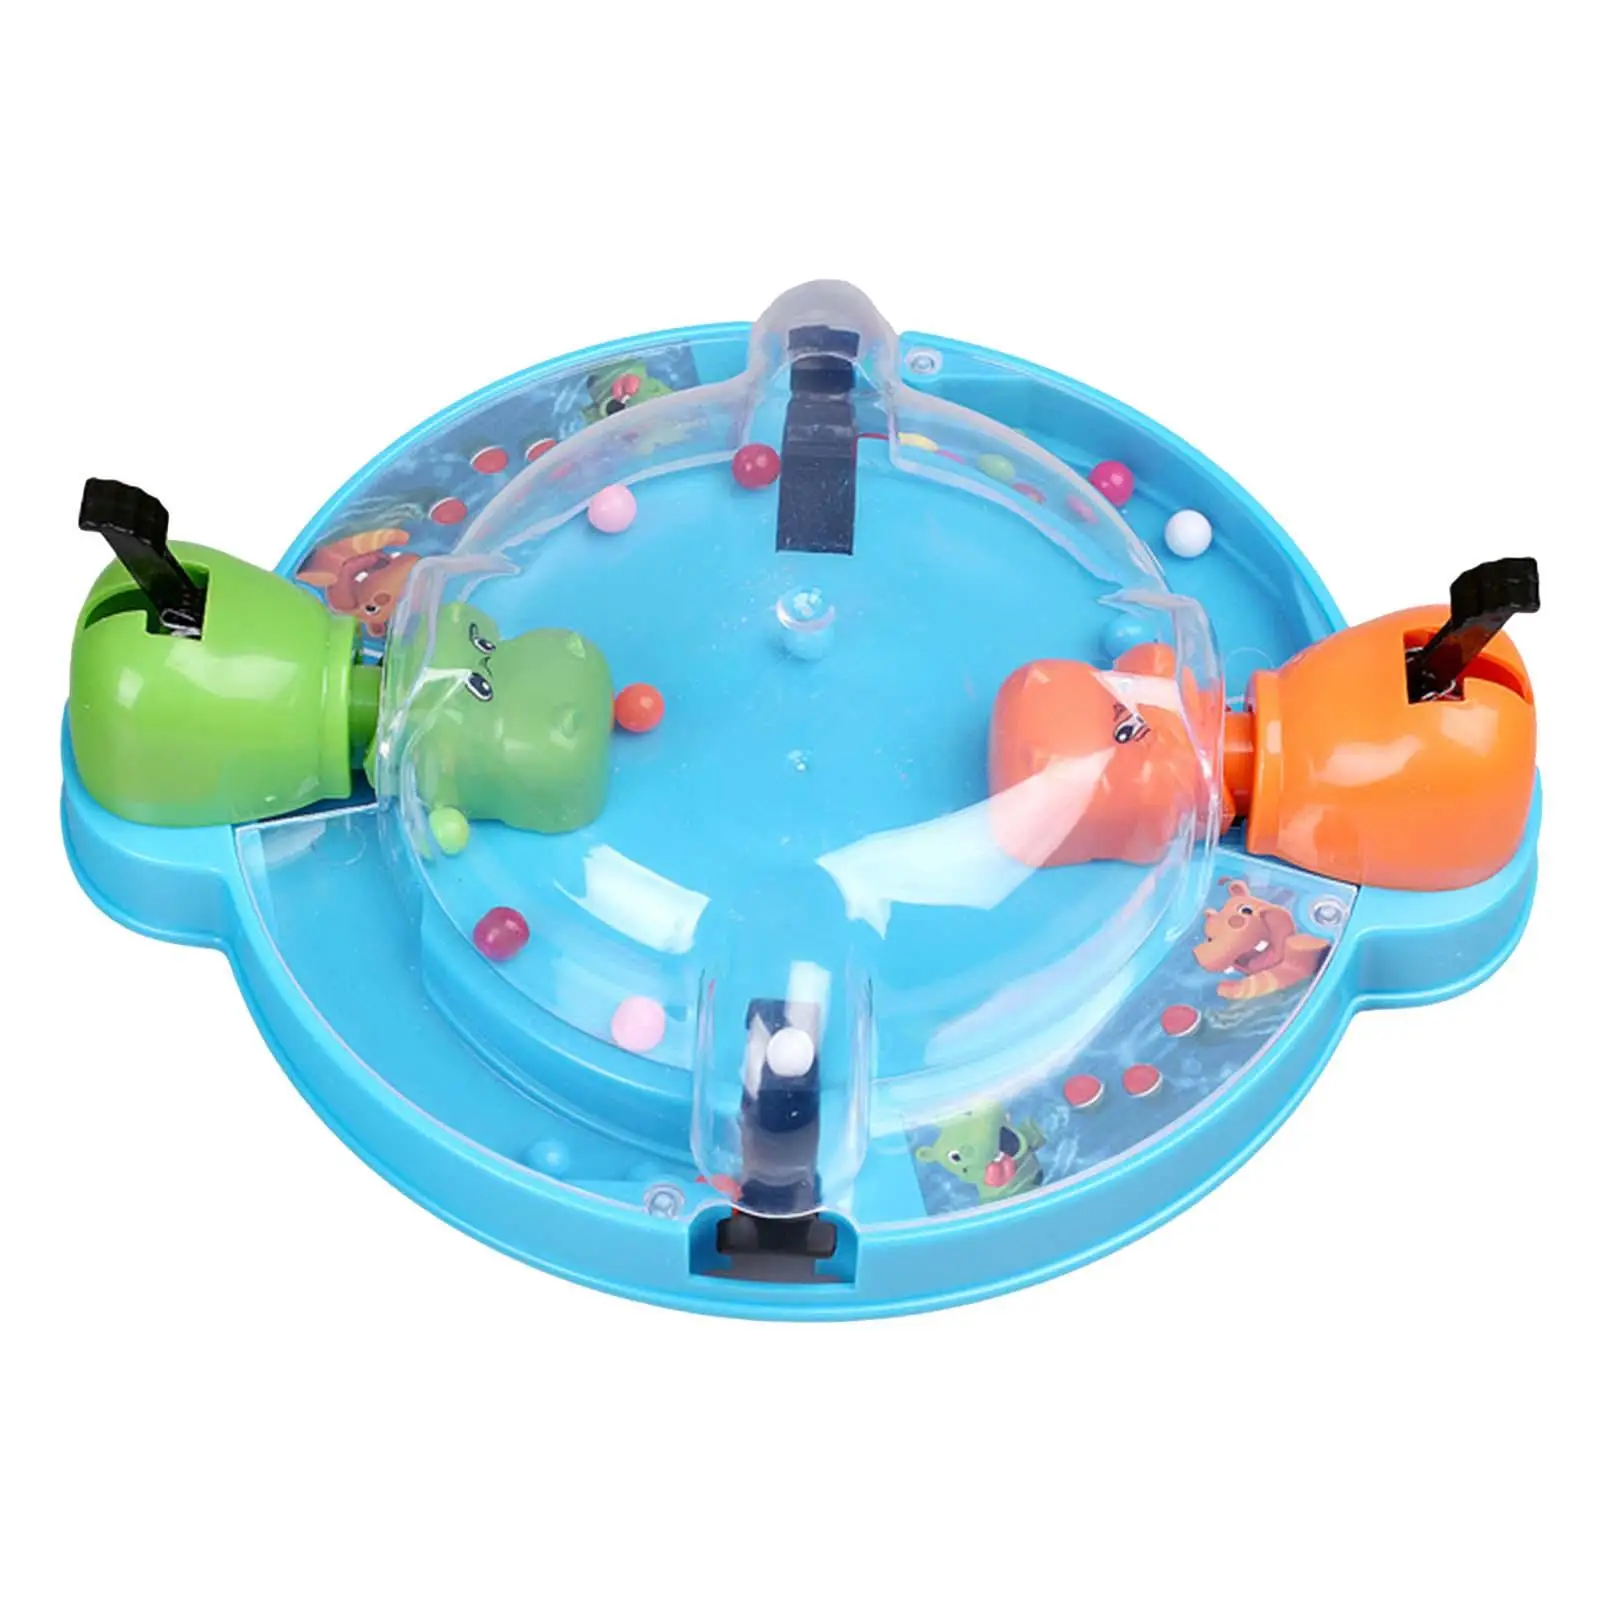 

speeds race Toy Fine Motor Skills Interactive Educational Hippos grab and game for Gifts Imagination Birthday Thinking Leisure